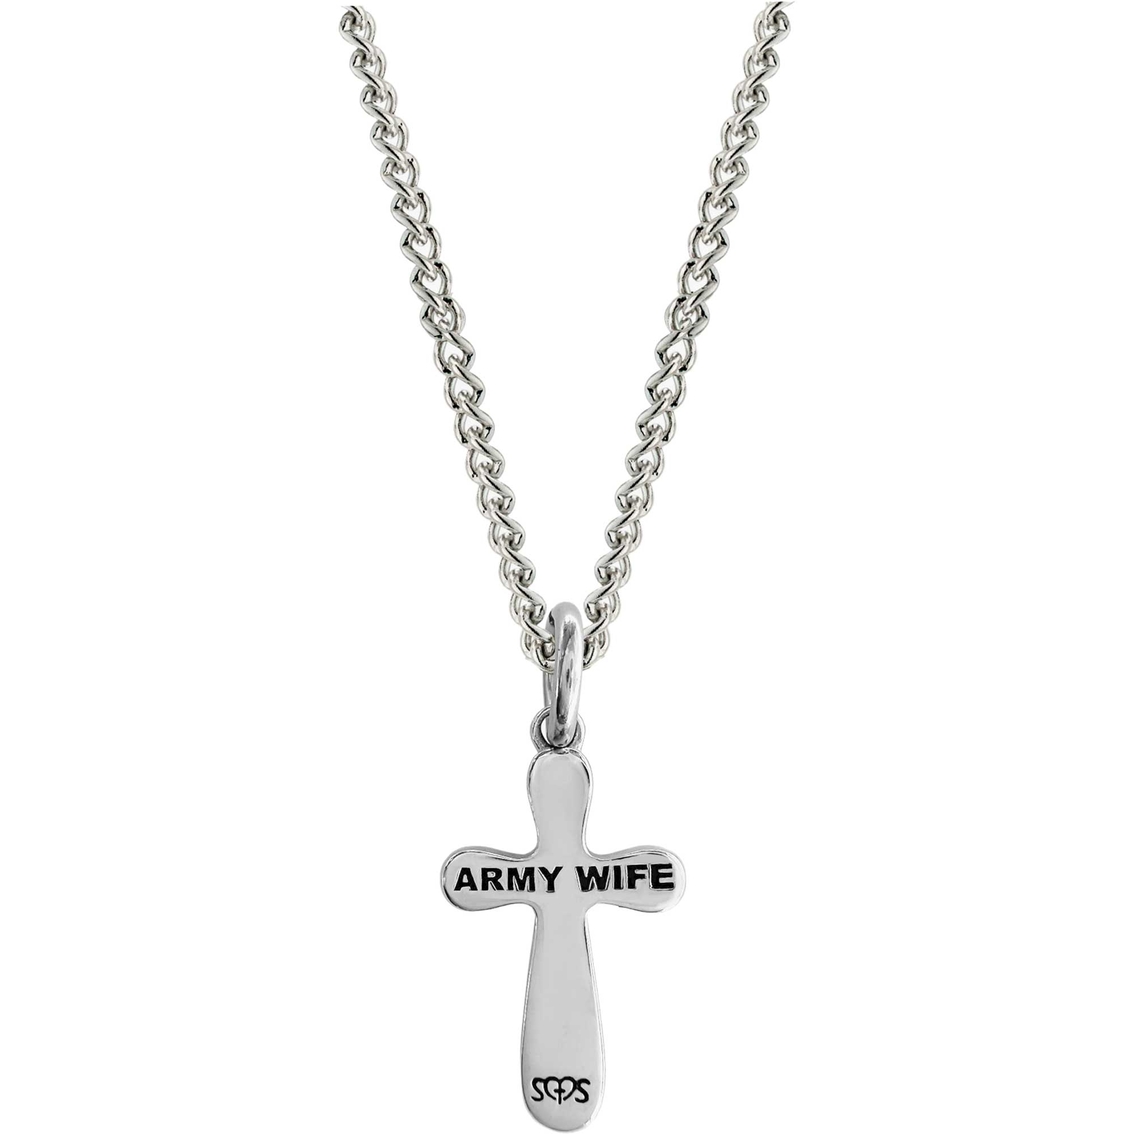 Shields of Strength Stainless Army Wife Cross 1 Corinthians 13:8 Necklace - Image 2 of 3